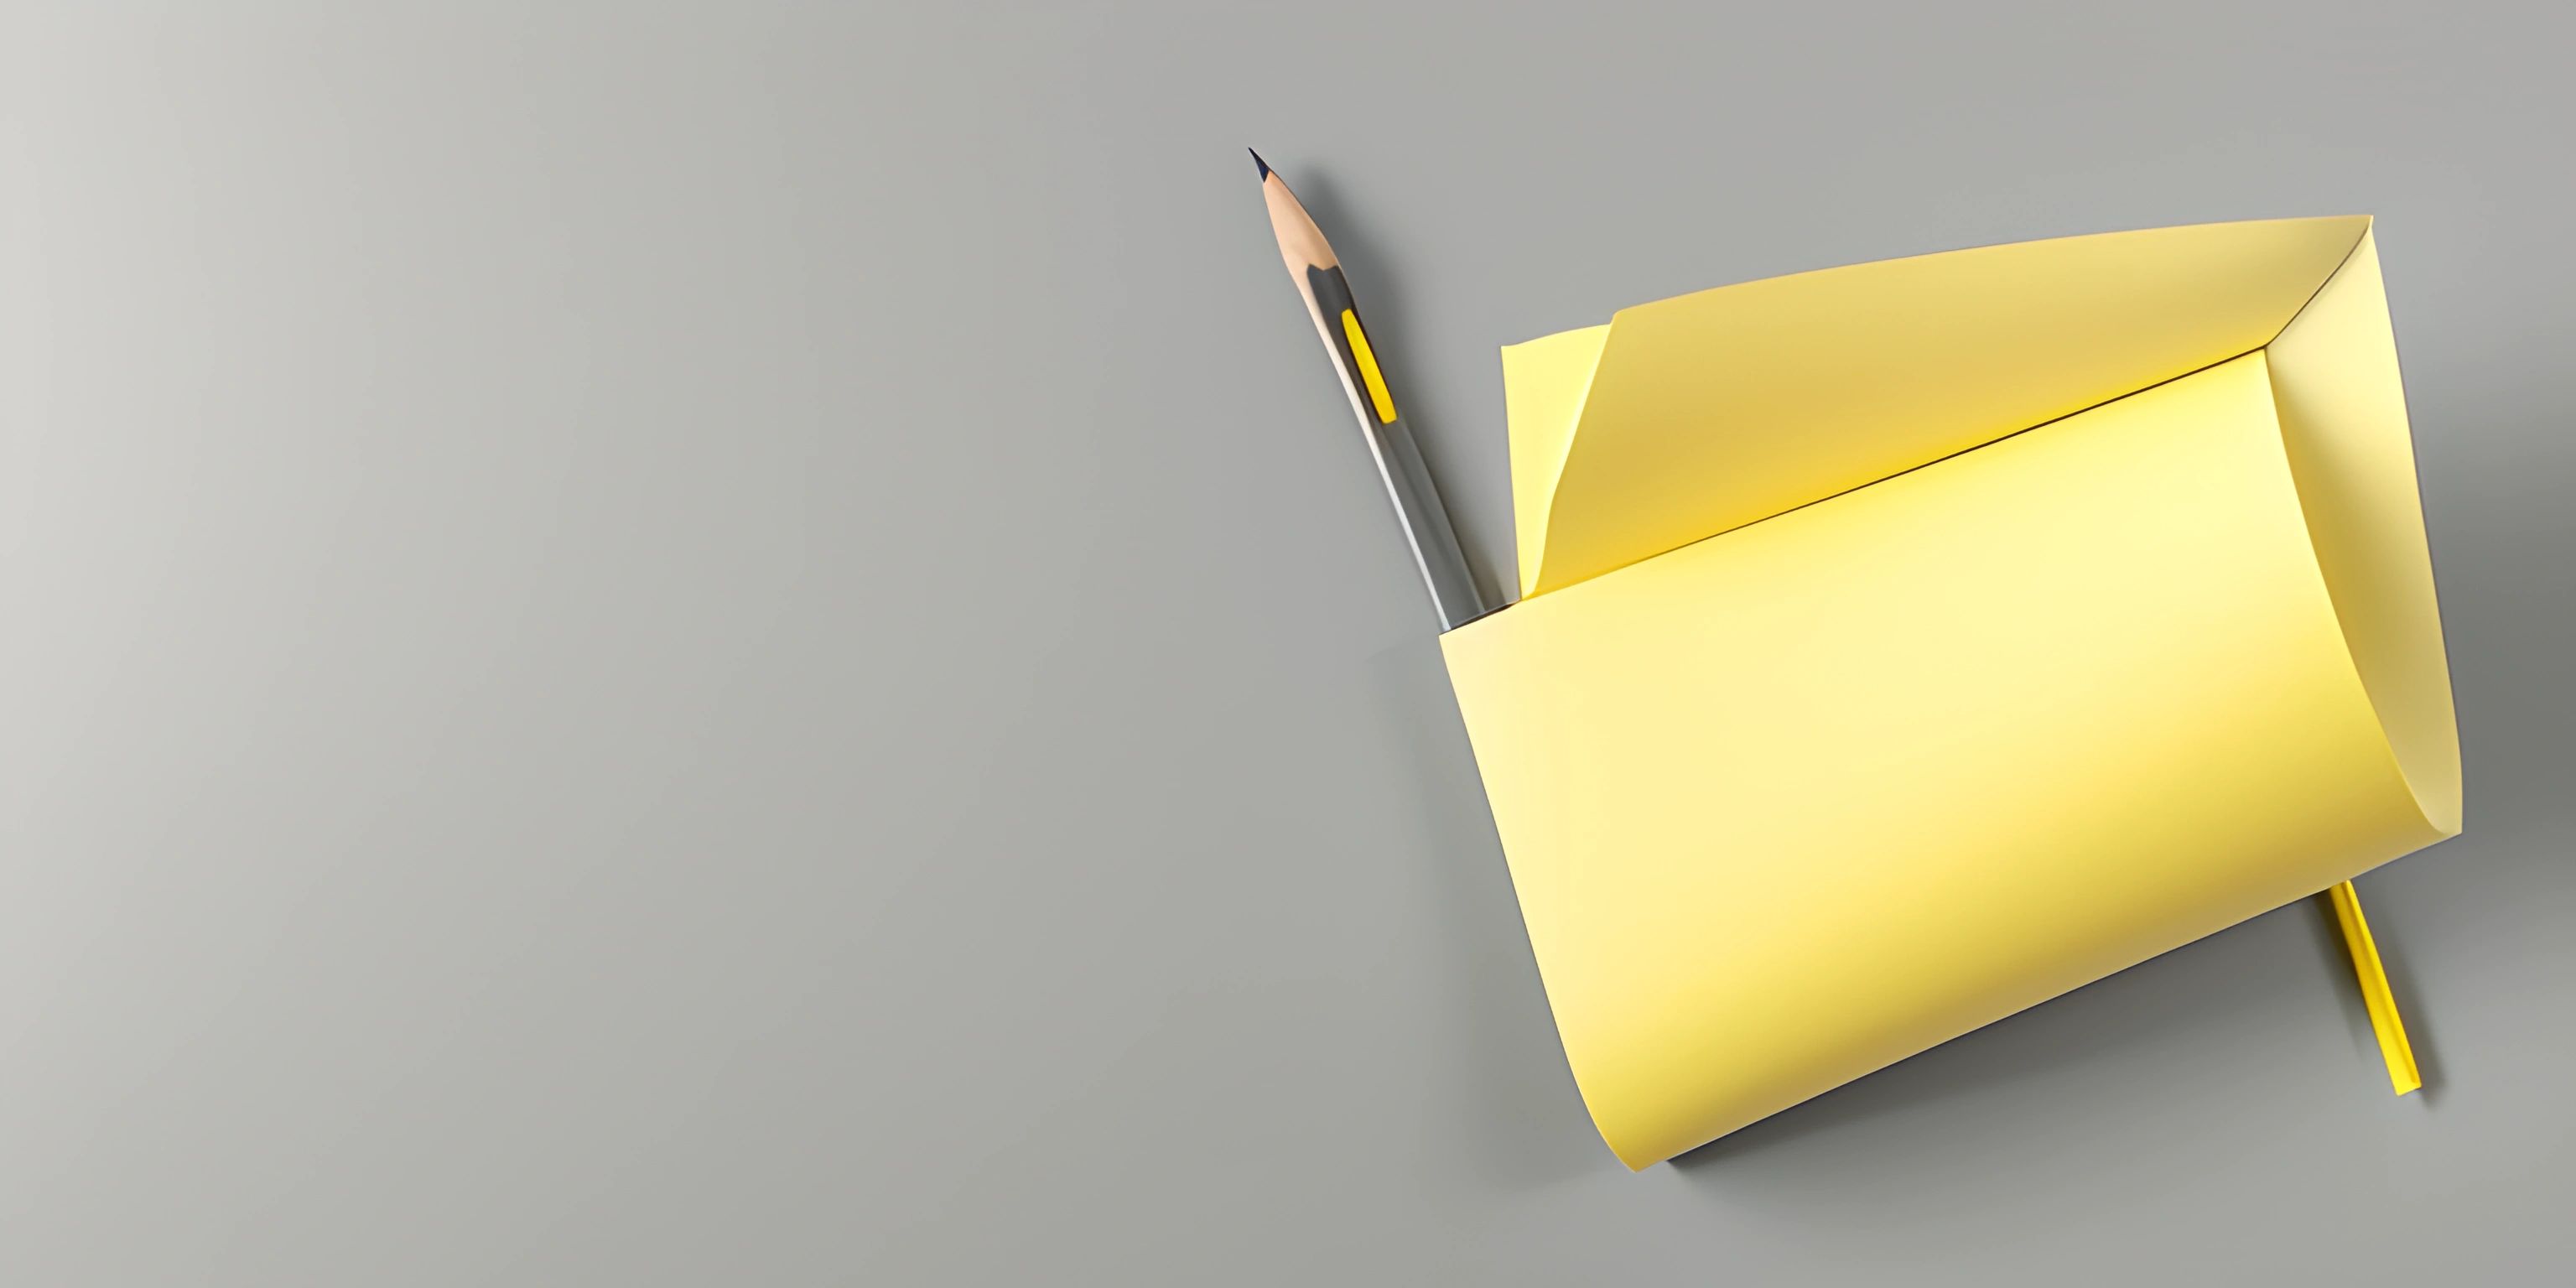 an eraser laying on top of yellow notes and pencil in a corner of the image